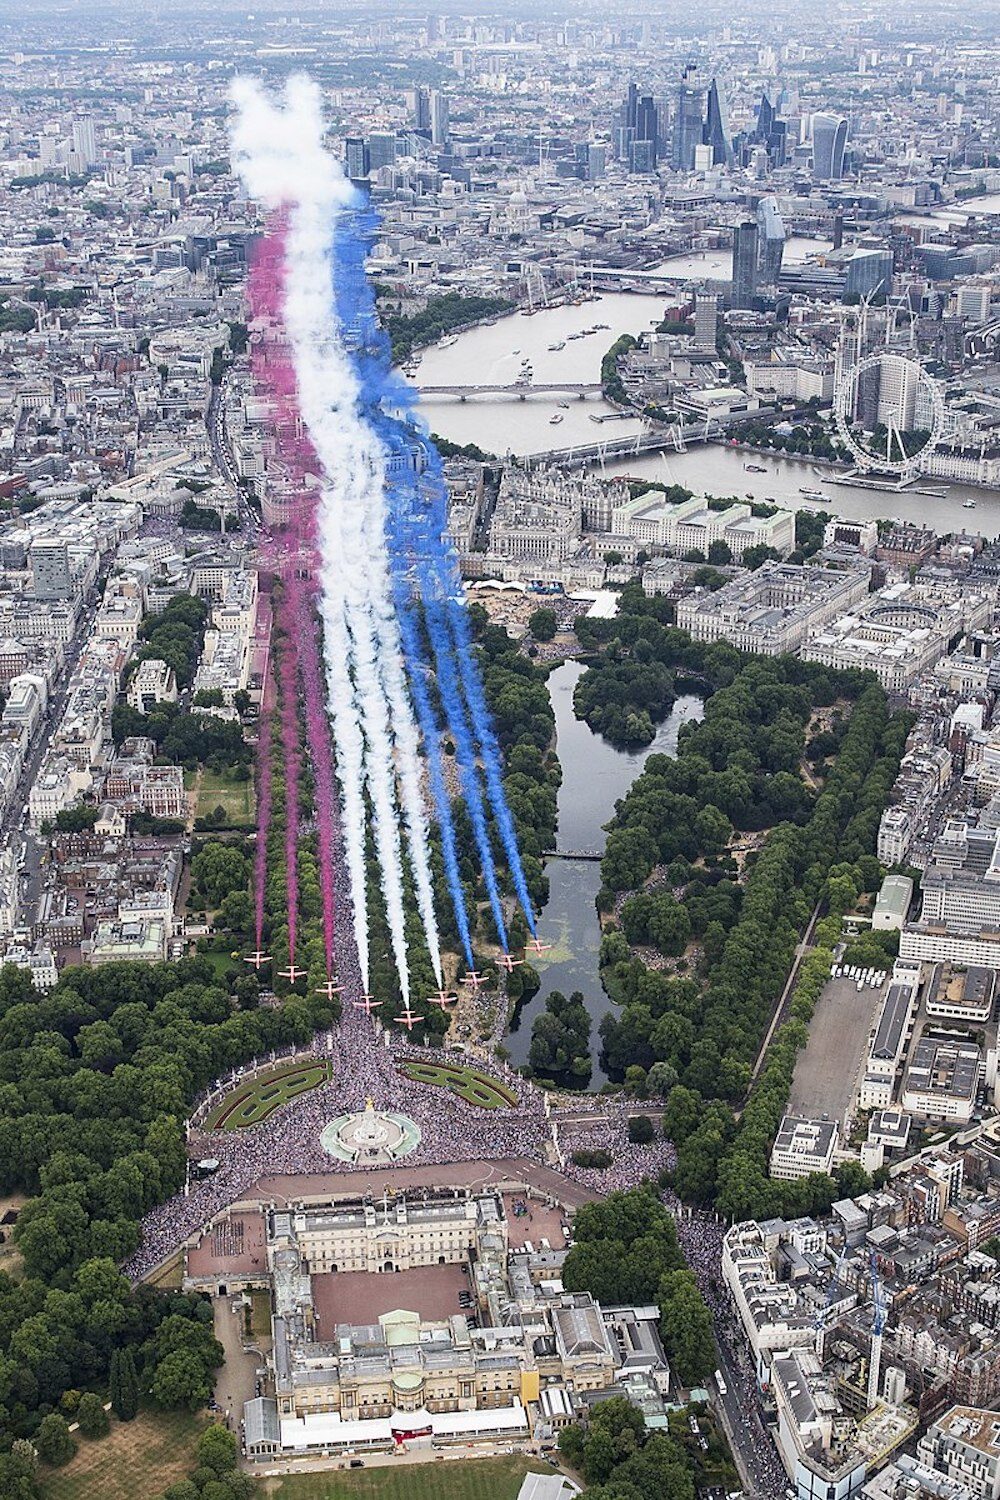 Red Arrows taking part in the RAF100 parade and flypast over London. Photo Credit: © Cpl Tim Laurence RAF/MOD via Wikimedia Commons.